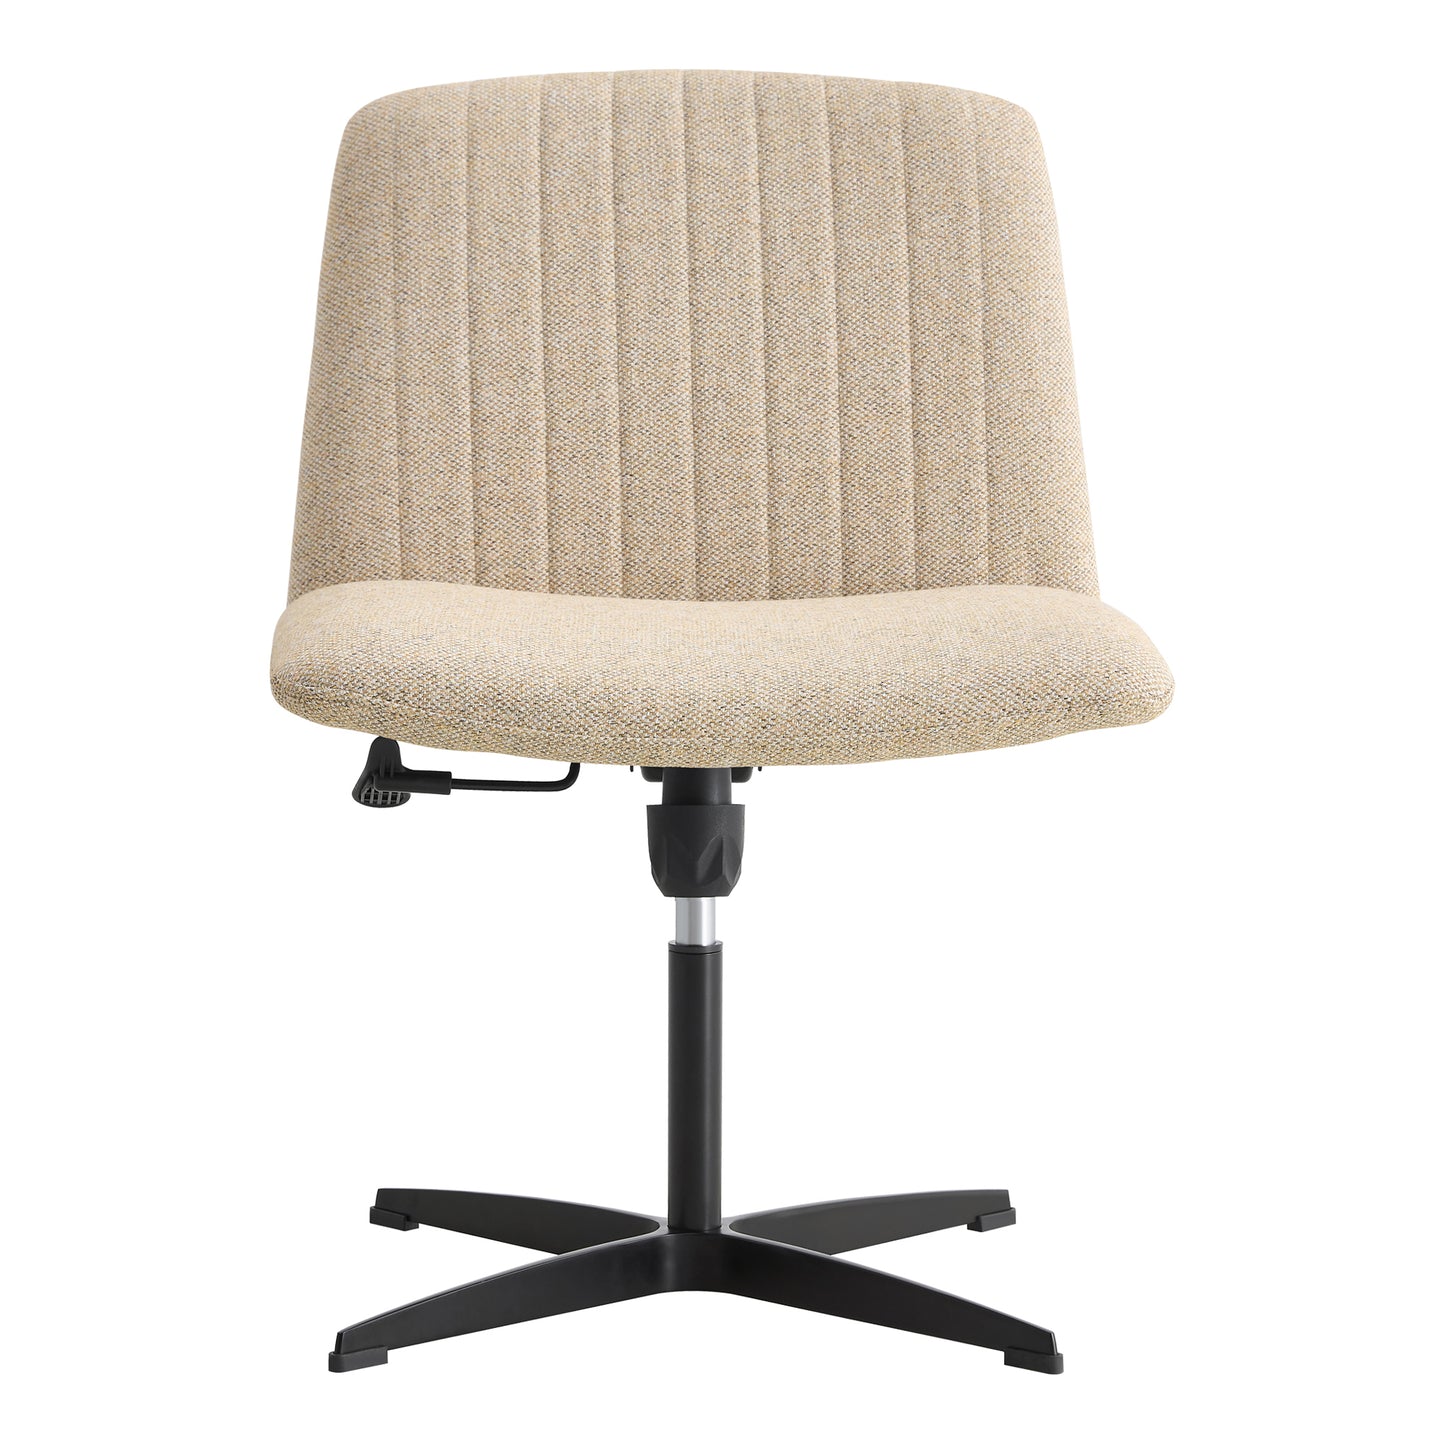 Fabric Material. Home Computer Chair Office Chair Adjustable 360 ° Swivel Cushion Chair With Black Foot Swivel Chair Makeup Chair Study Desk Chair. No Wheels